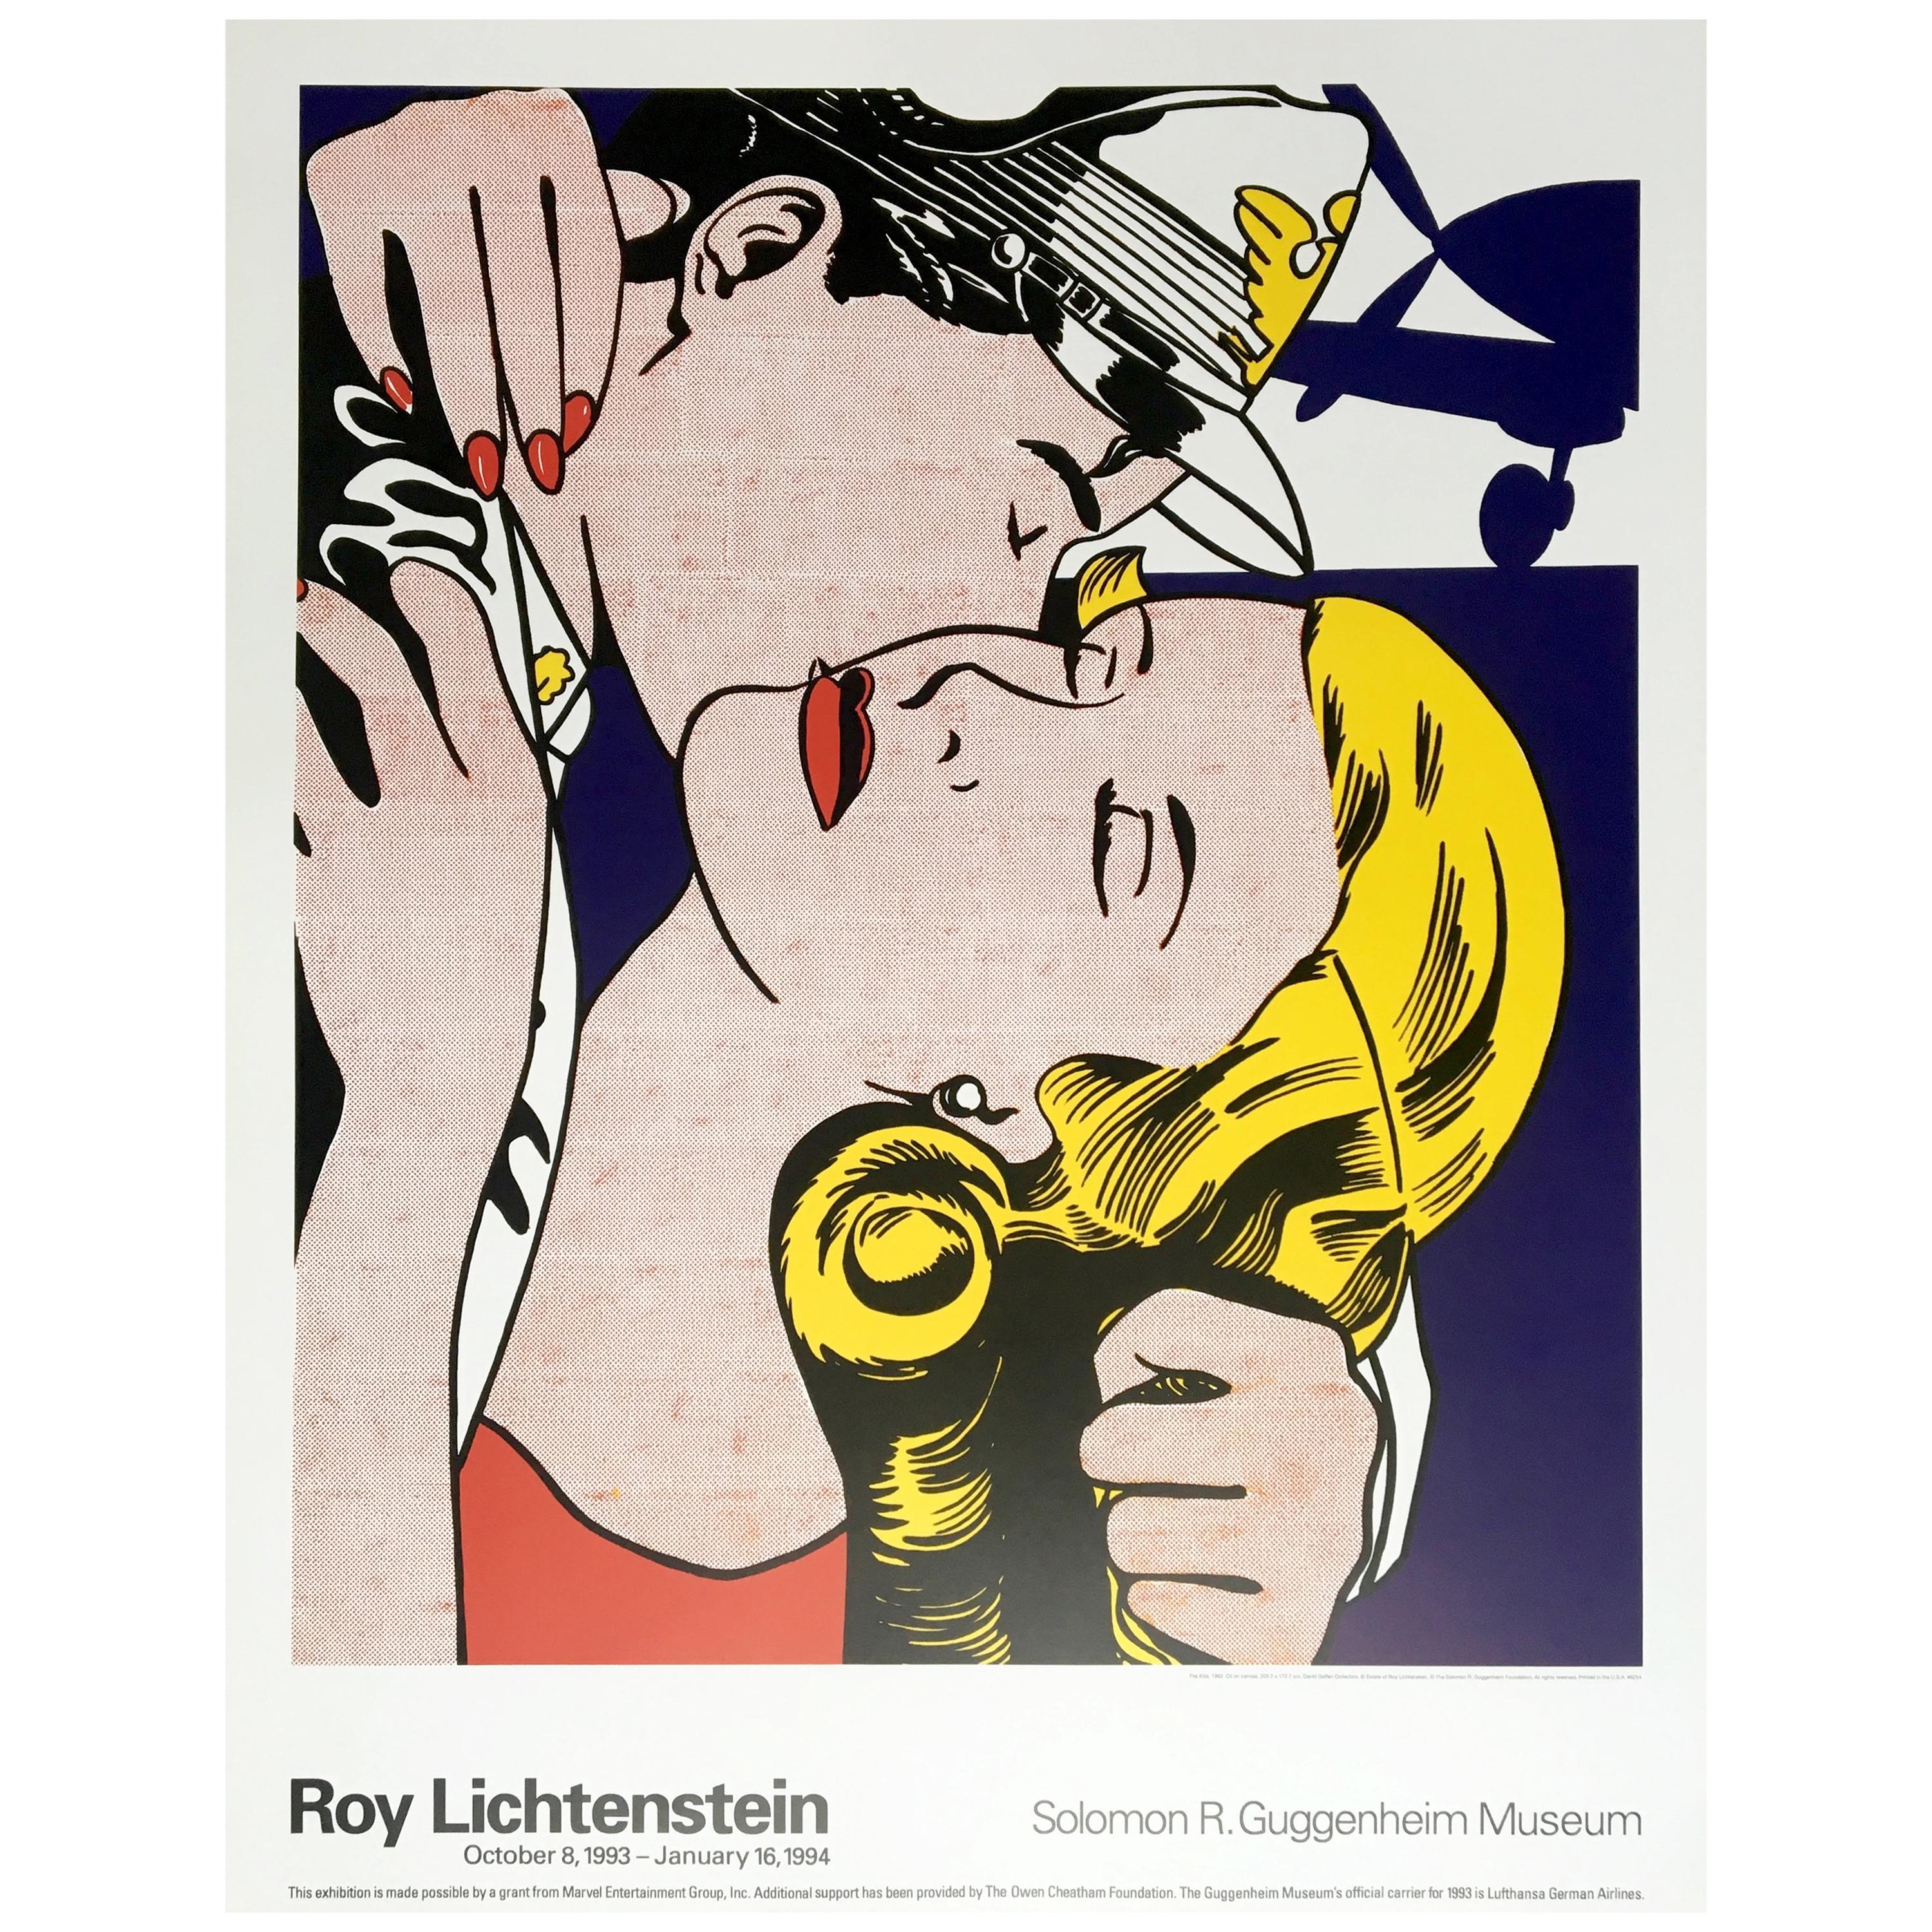 Roy Lichtenstein 'The Kiss' Rare Original 1993 Poster Print on Wove Paper For Sale